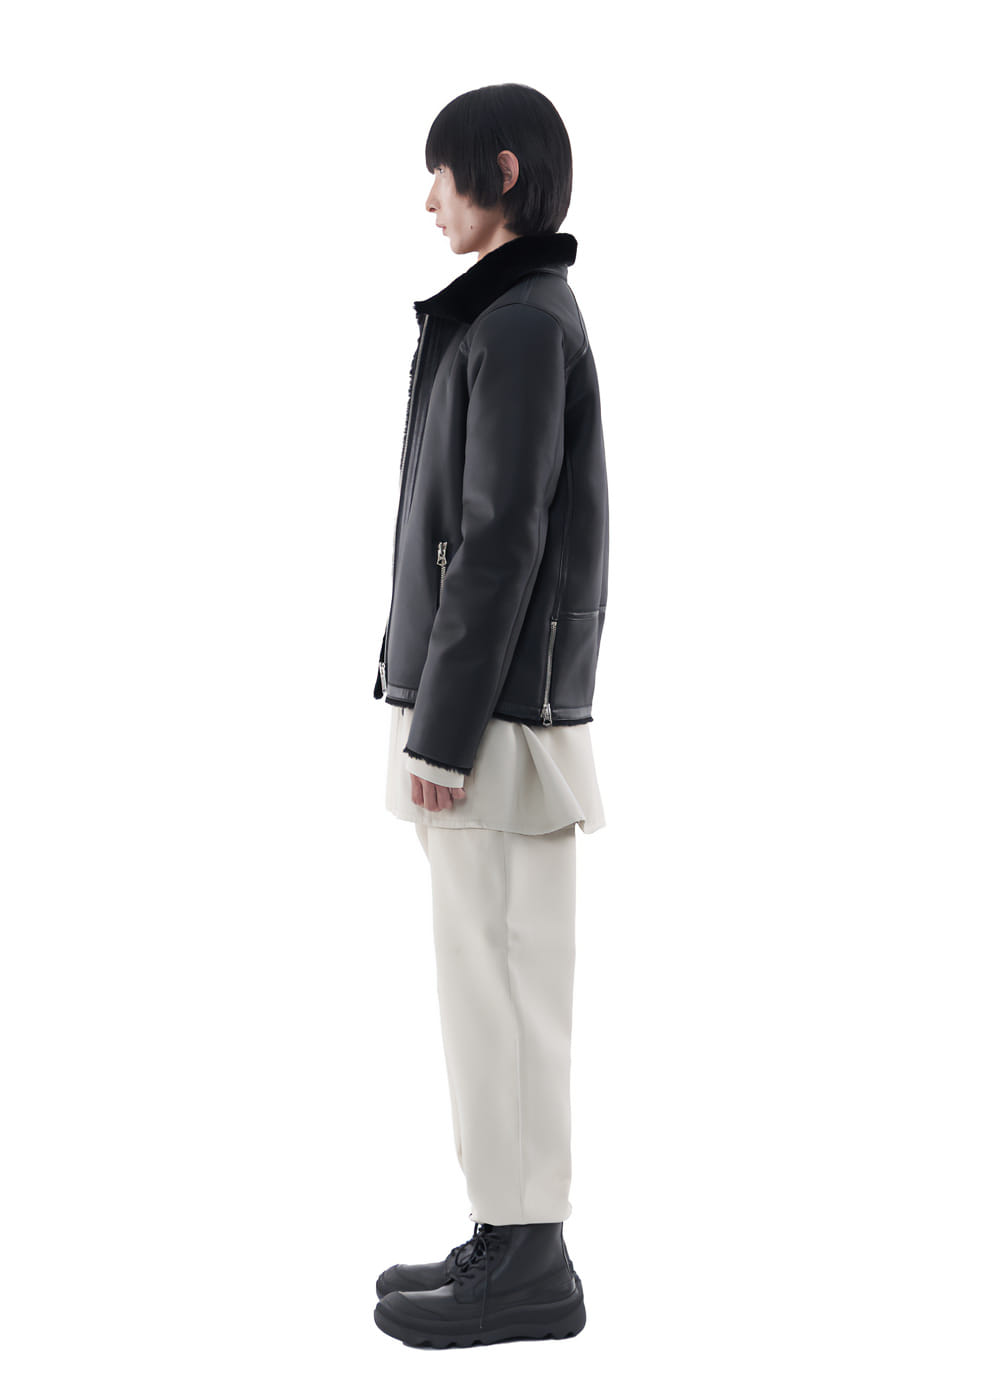 Valencia Merino Short Shearling Jacket BlackMaterial Turkish MerinoPrice 2,690,000It&#039;s a unisex shearling jacket that uses Merino material to feel soft leather and wool touch.